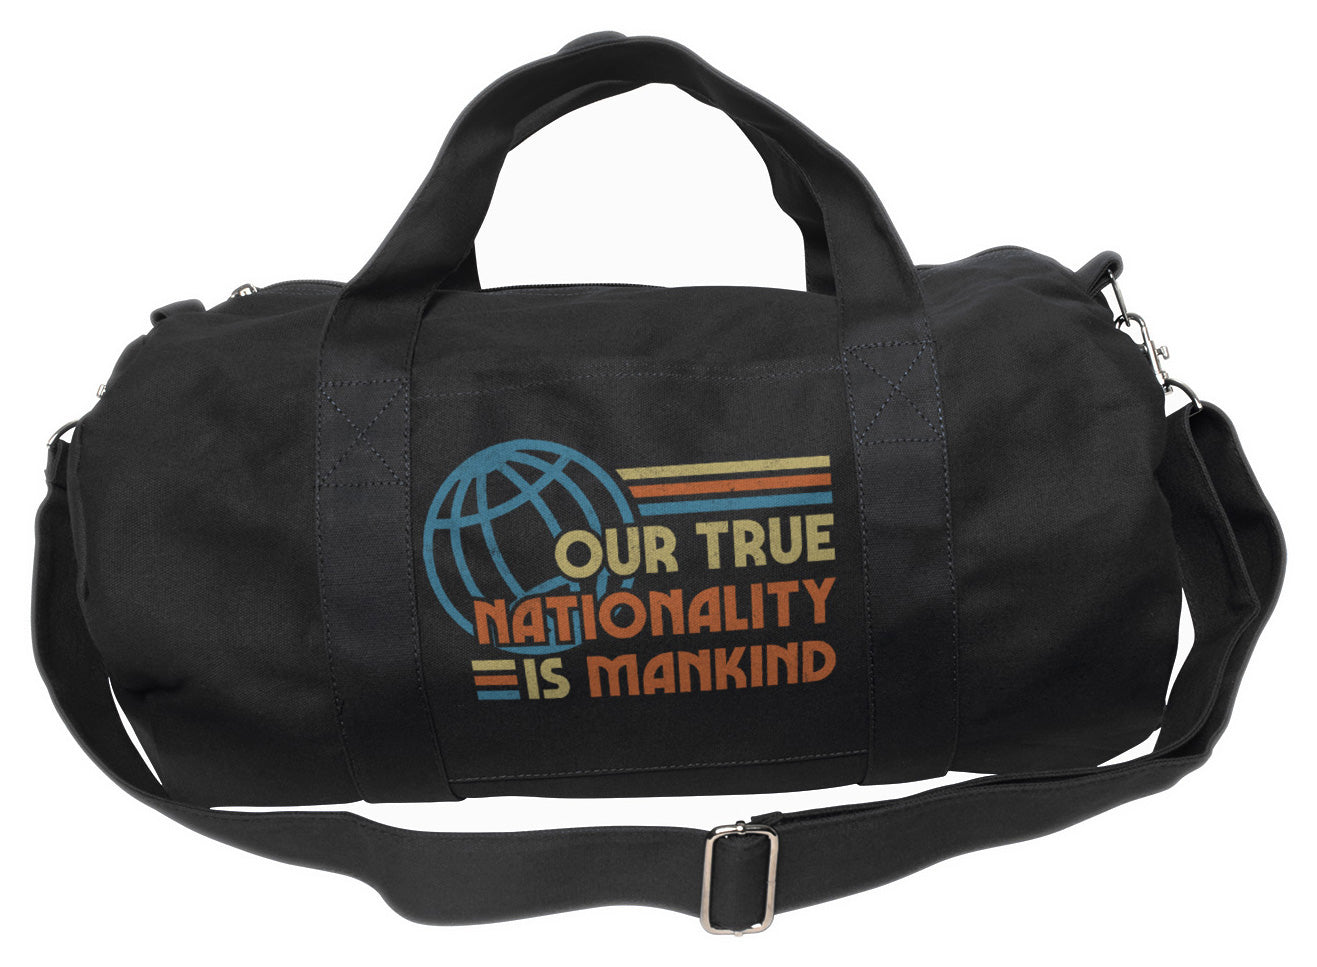 Our True Nationality is Mankind  Duffel Bag